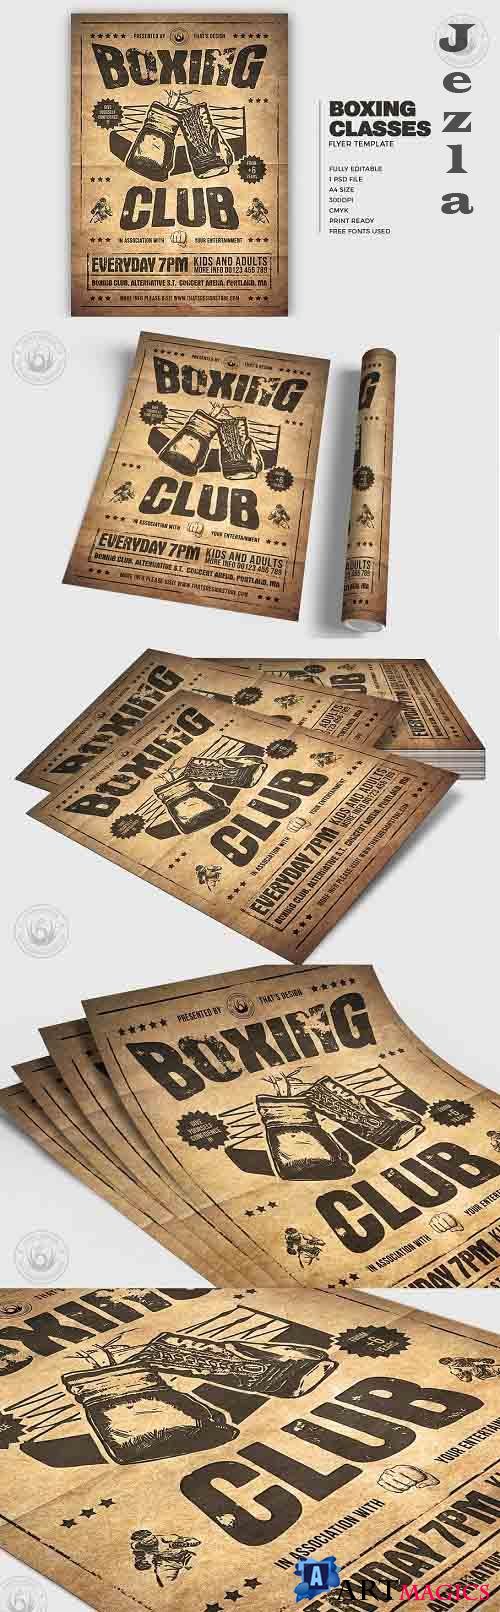 Boxing Classes Flyer Template V2 - 5052481